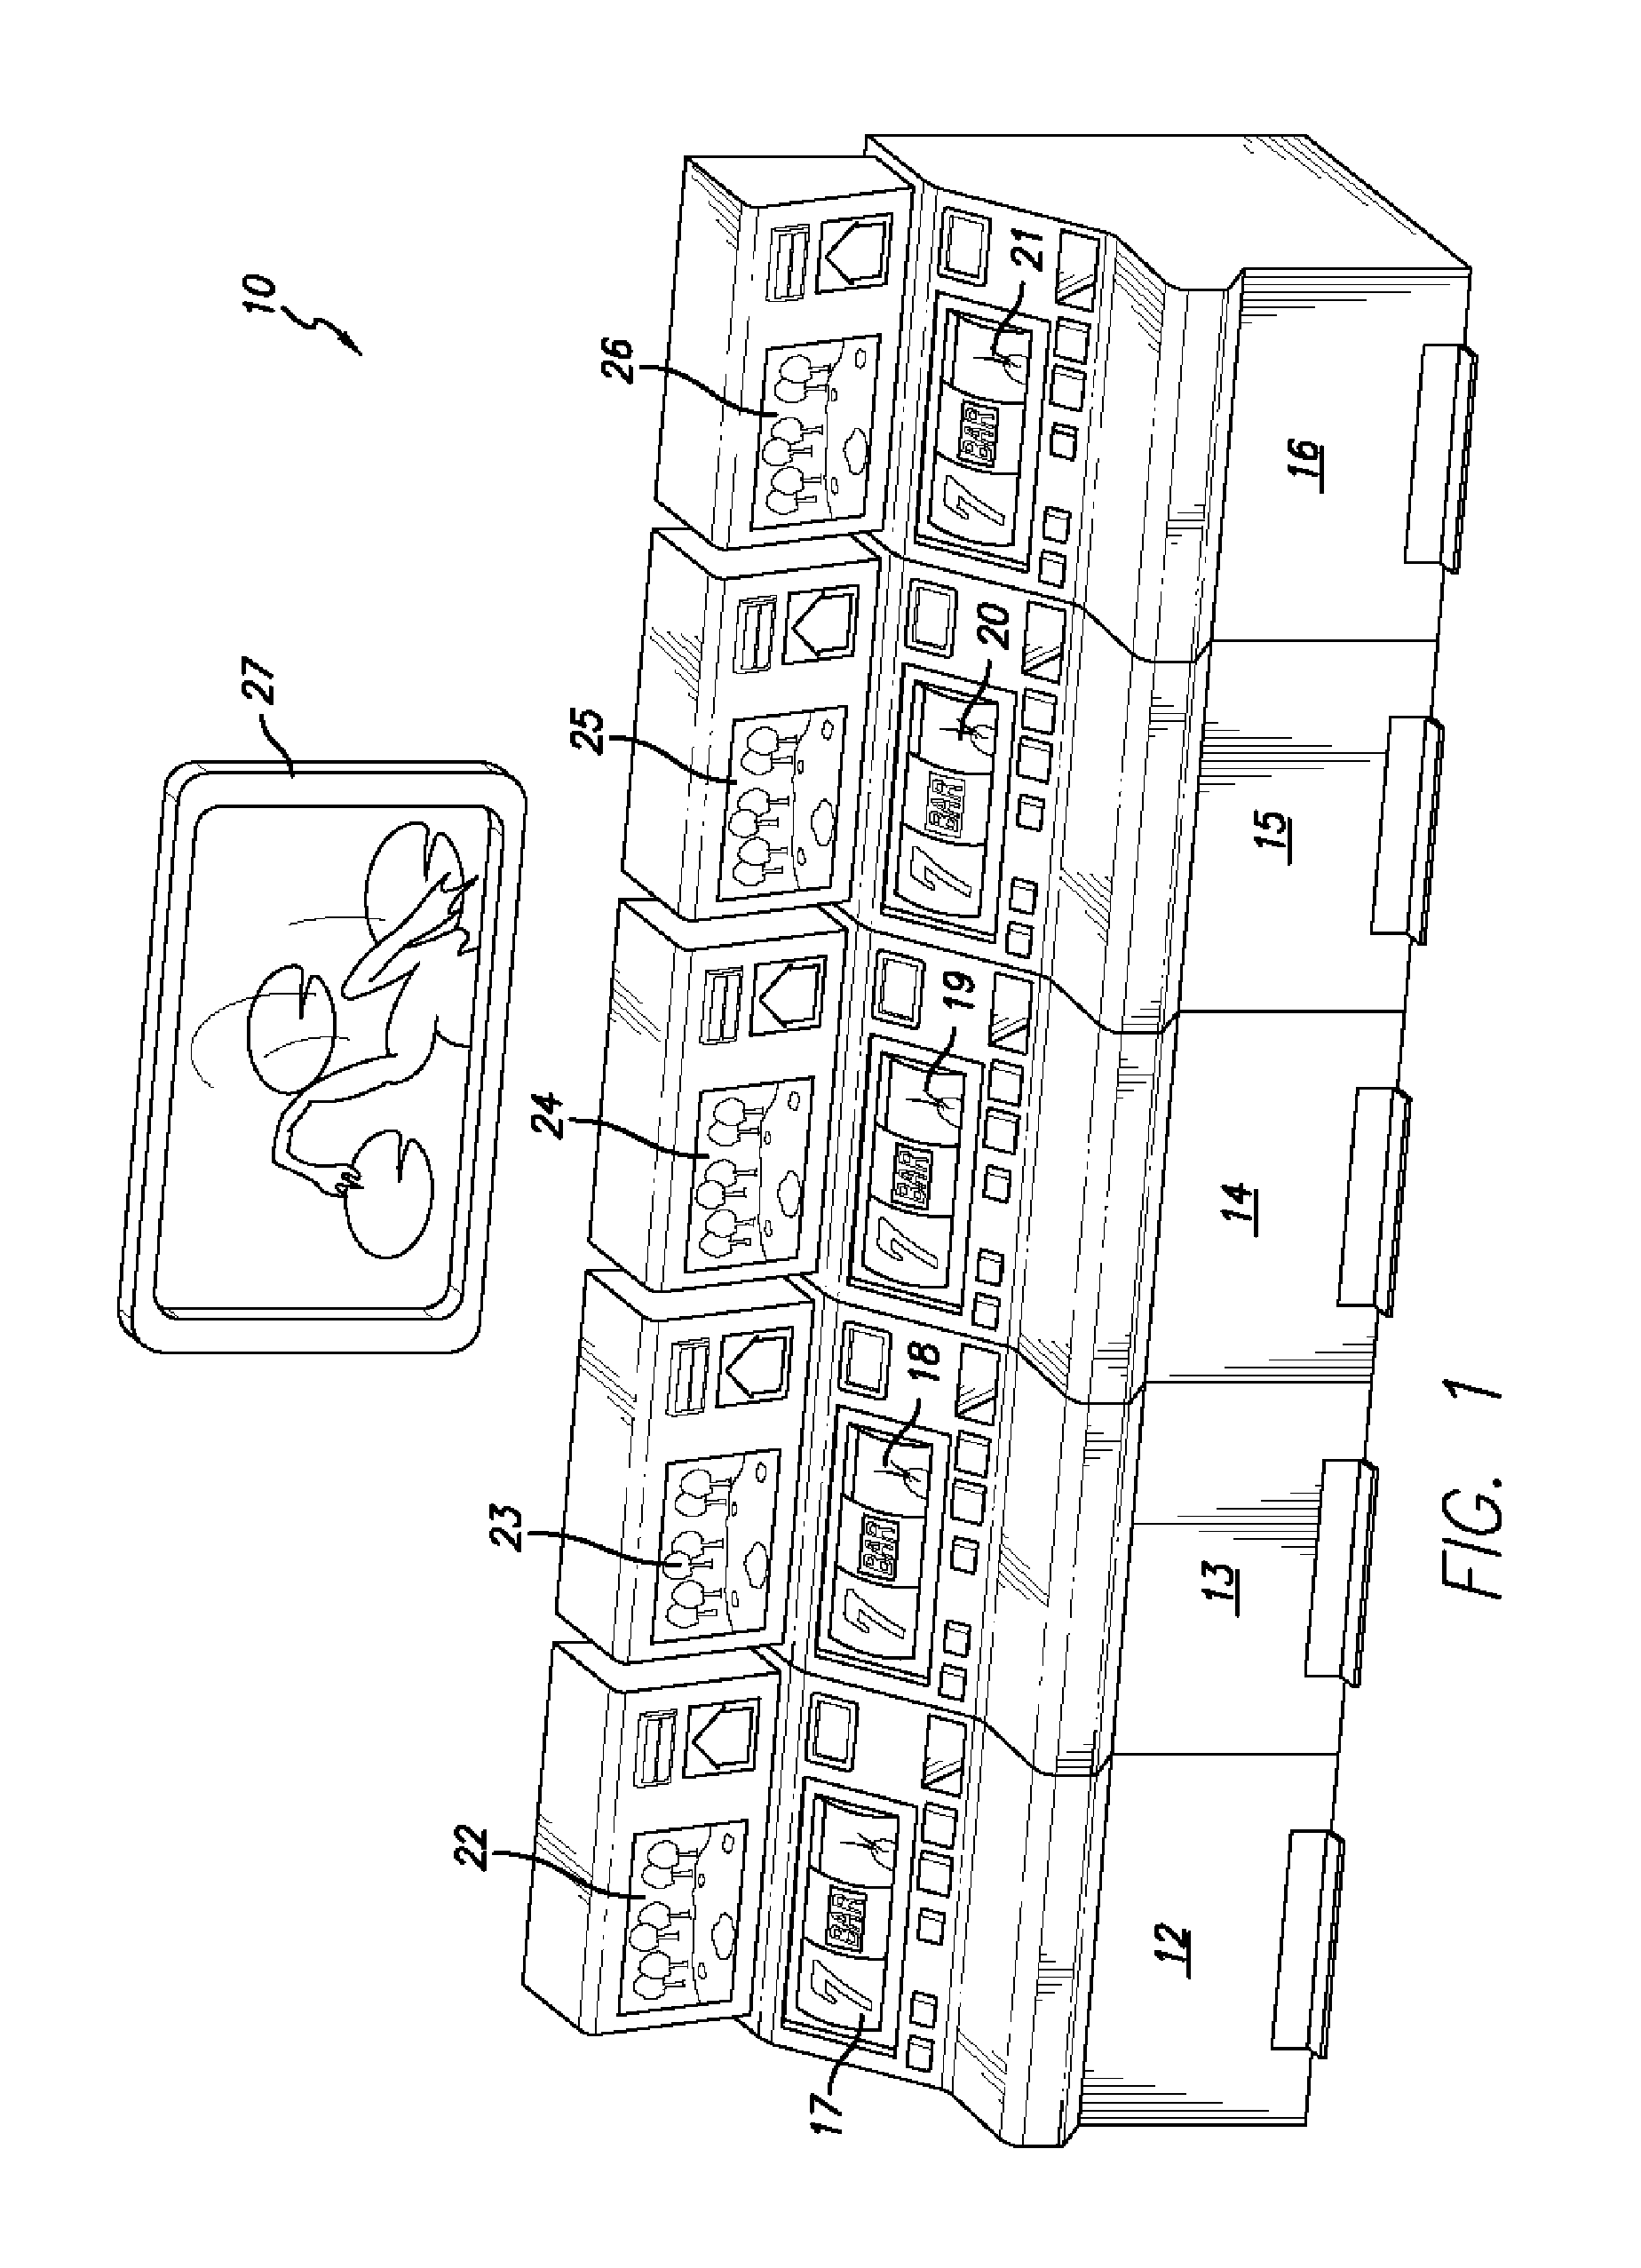 Gaming device video display system